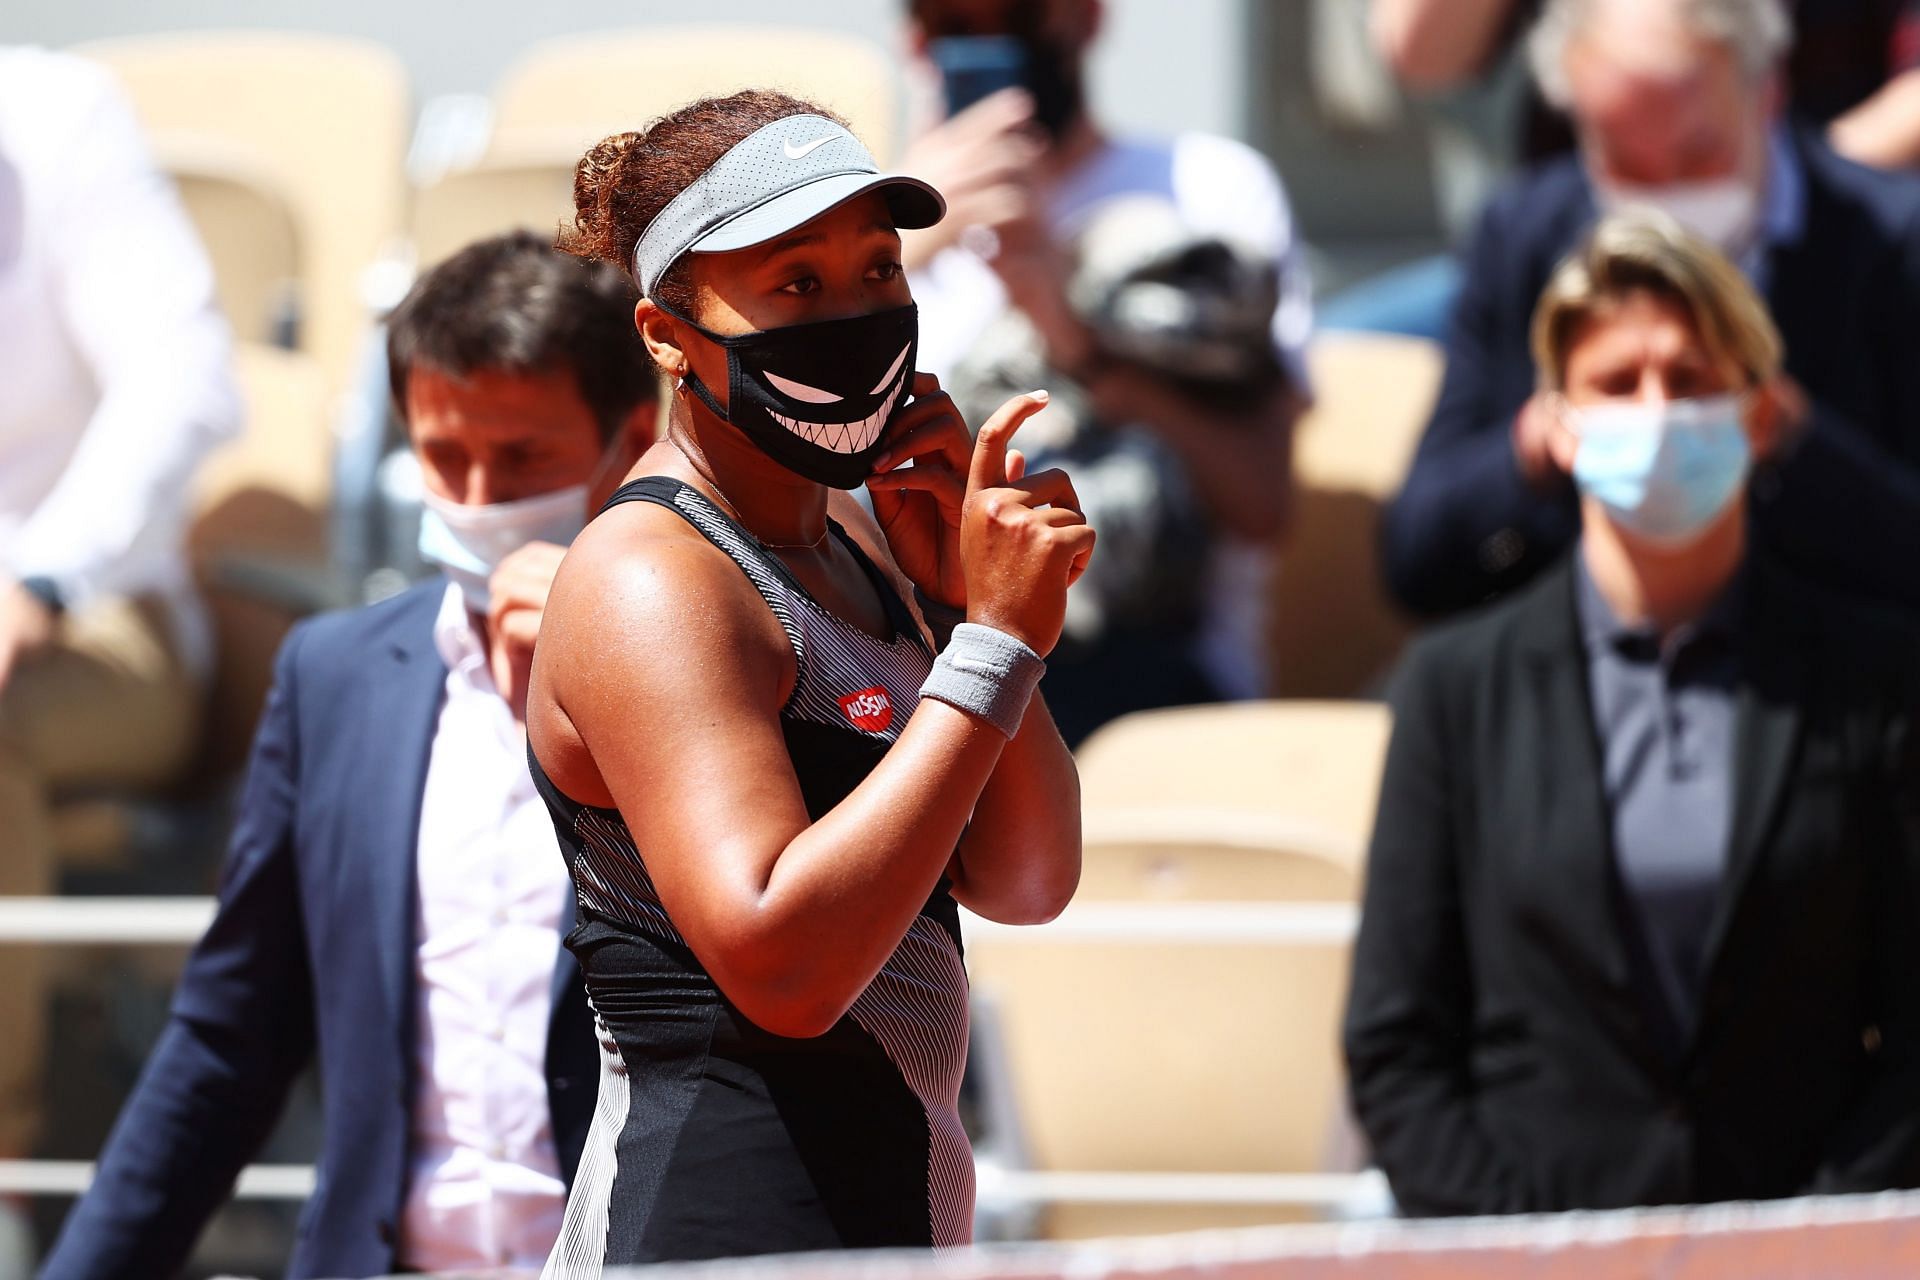 Osaka withdrew from the 2021 French Open citing mental health issues